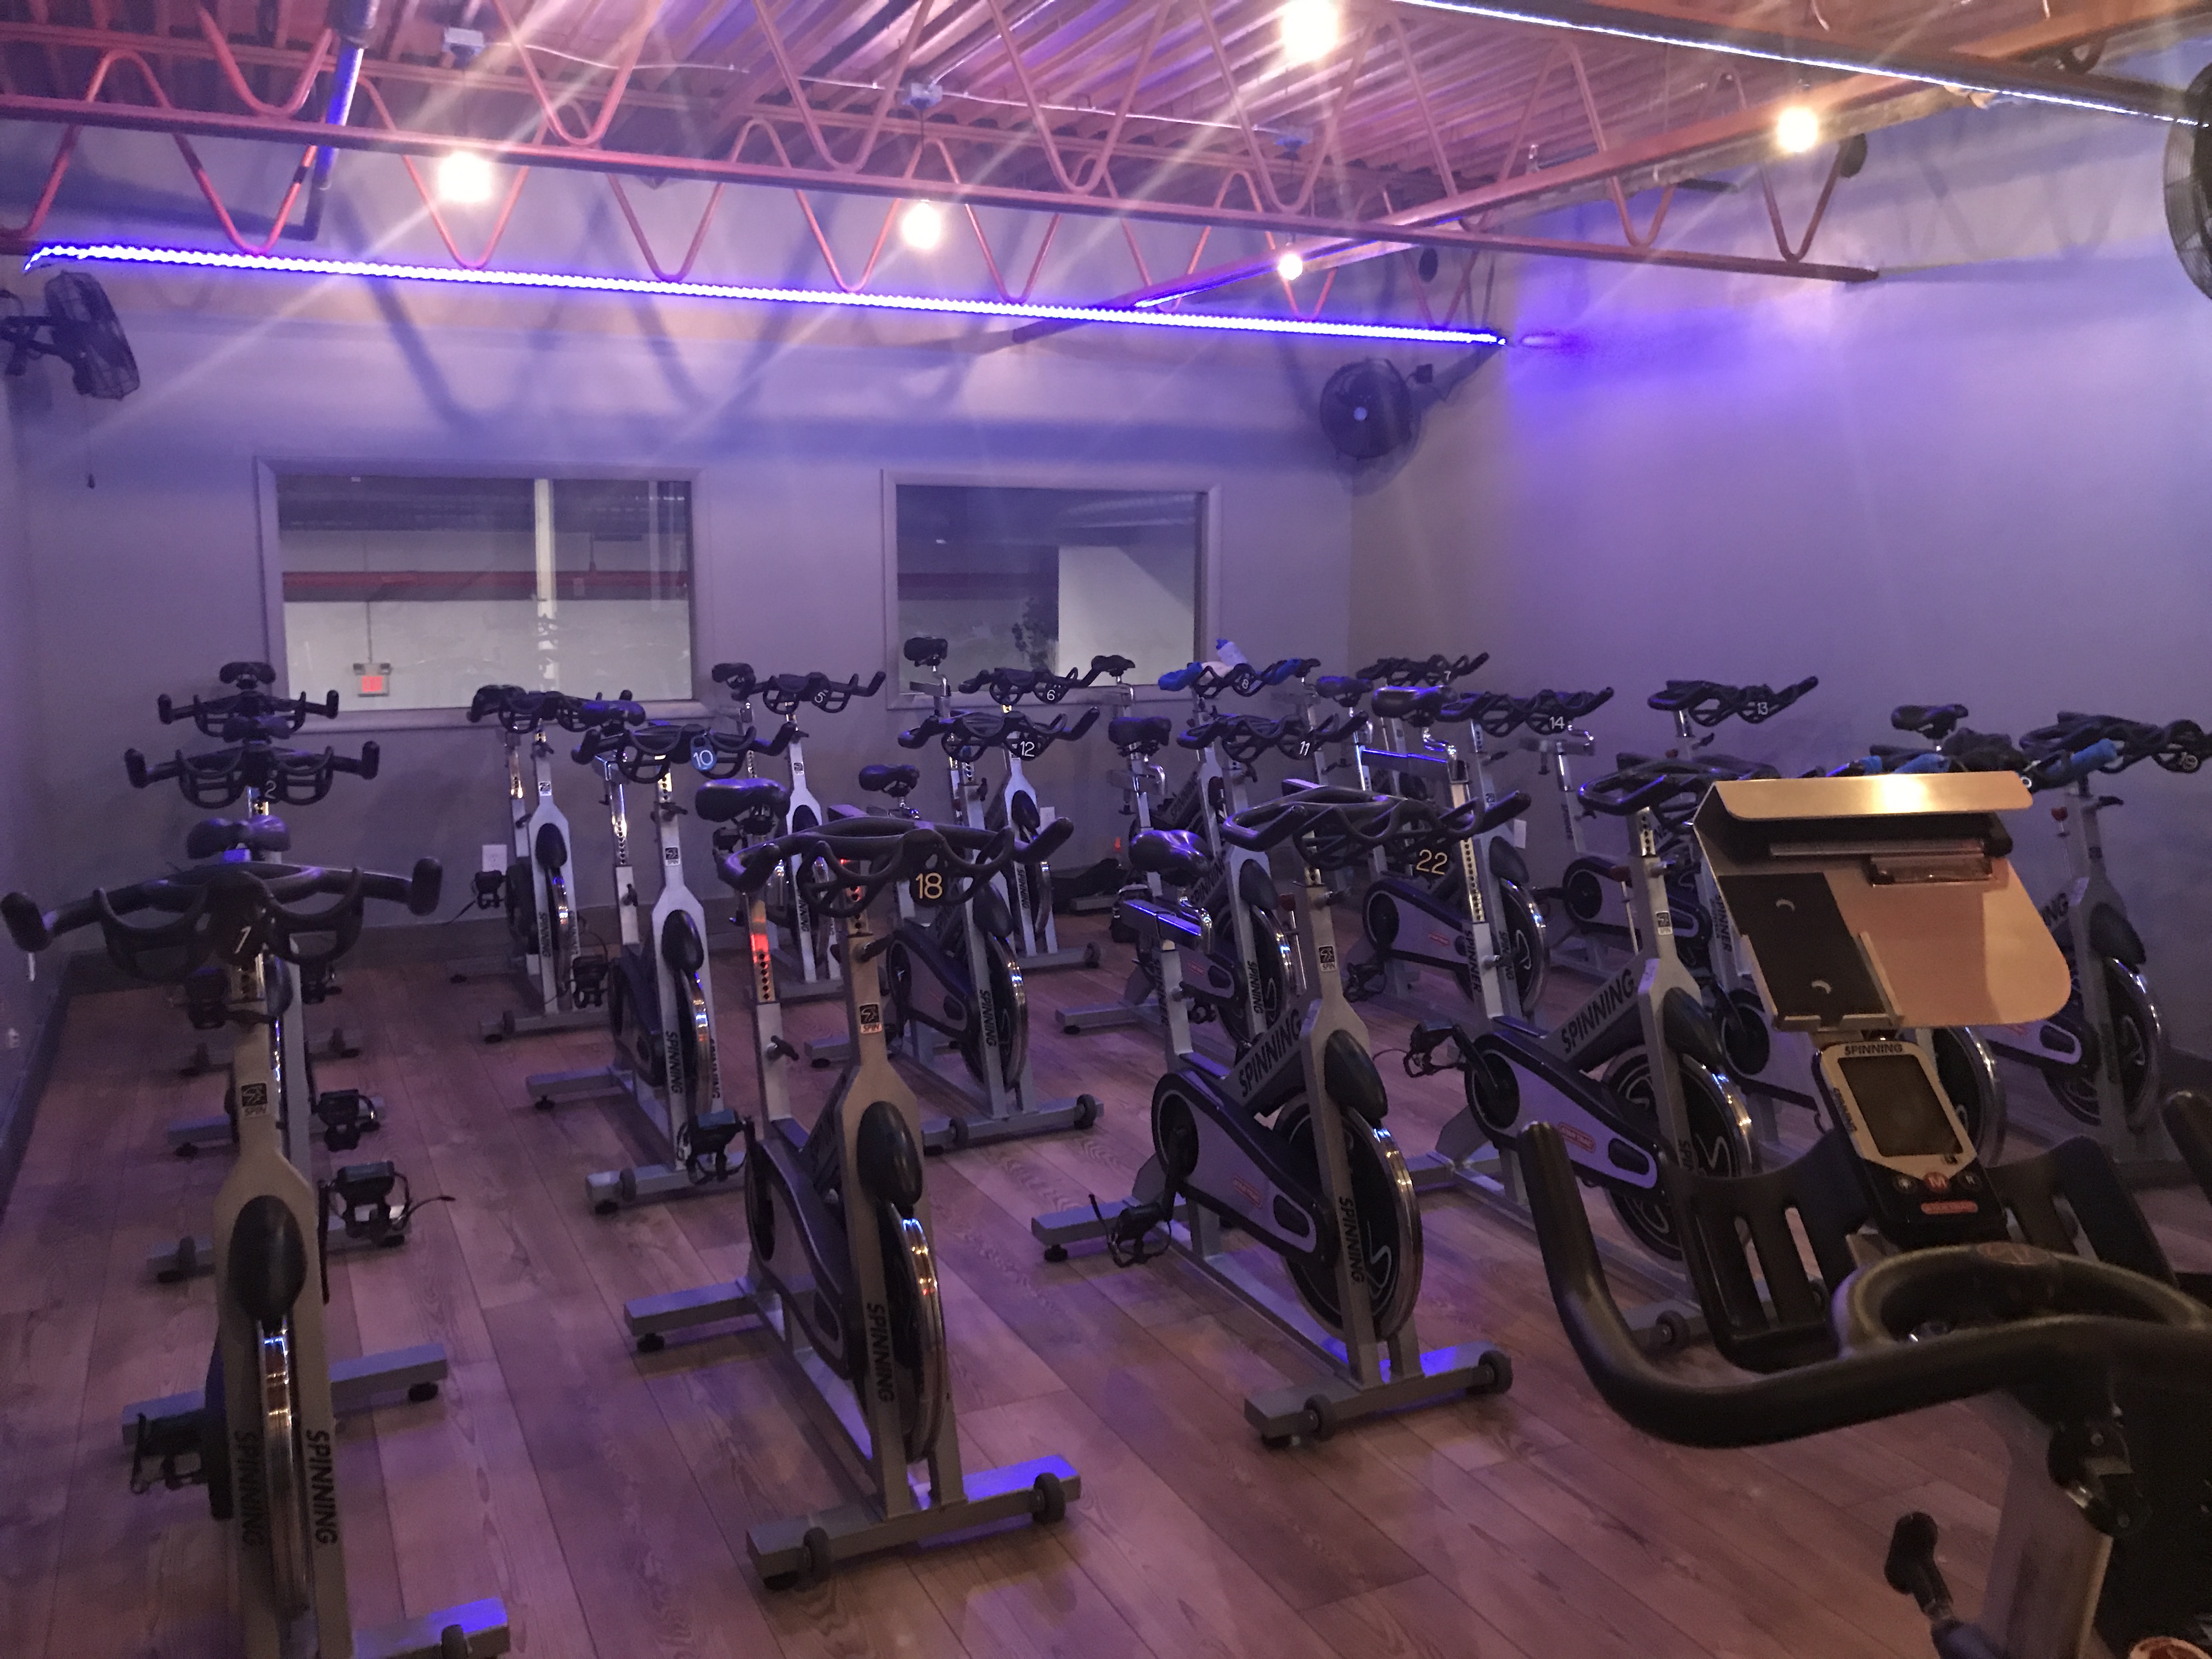 Try out our Offical Spinning Classes at Fit Happens